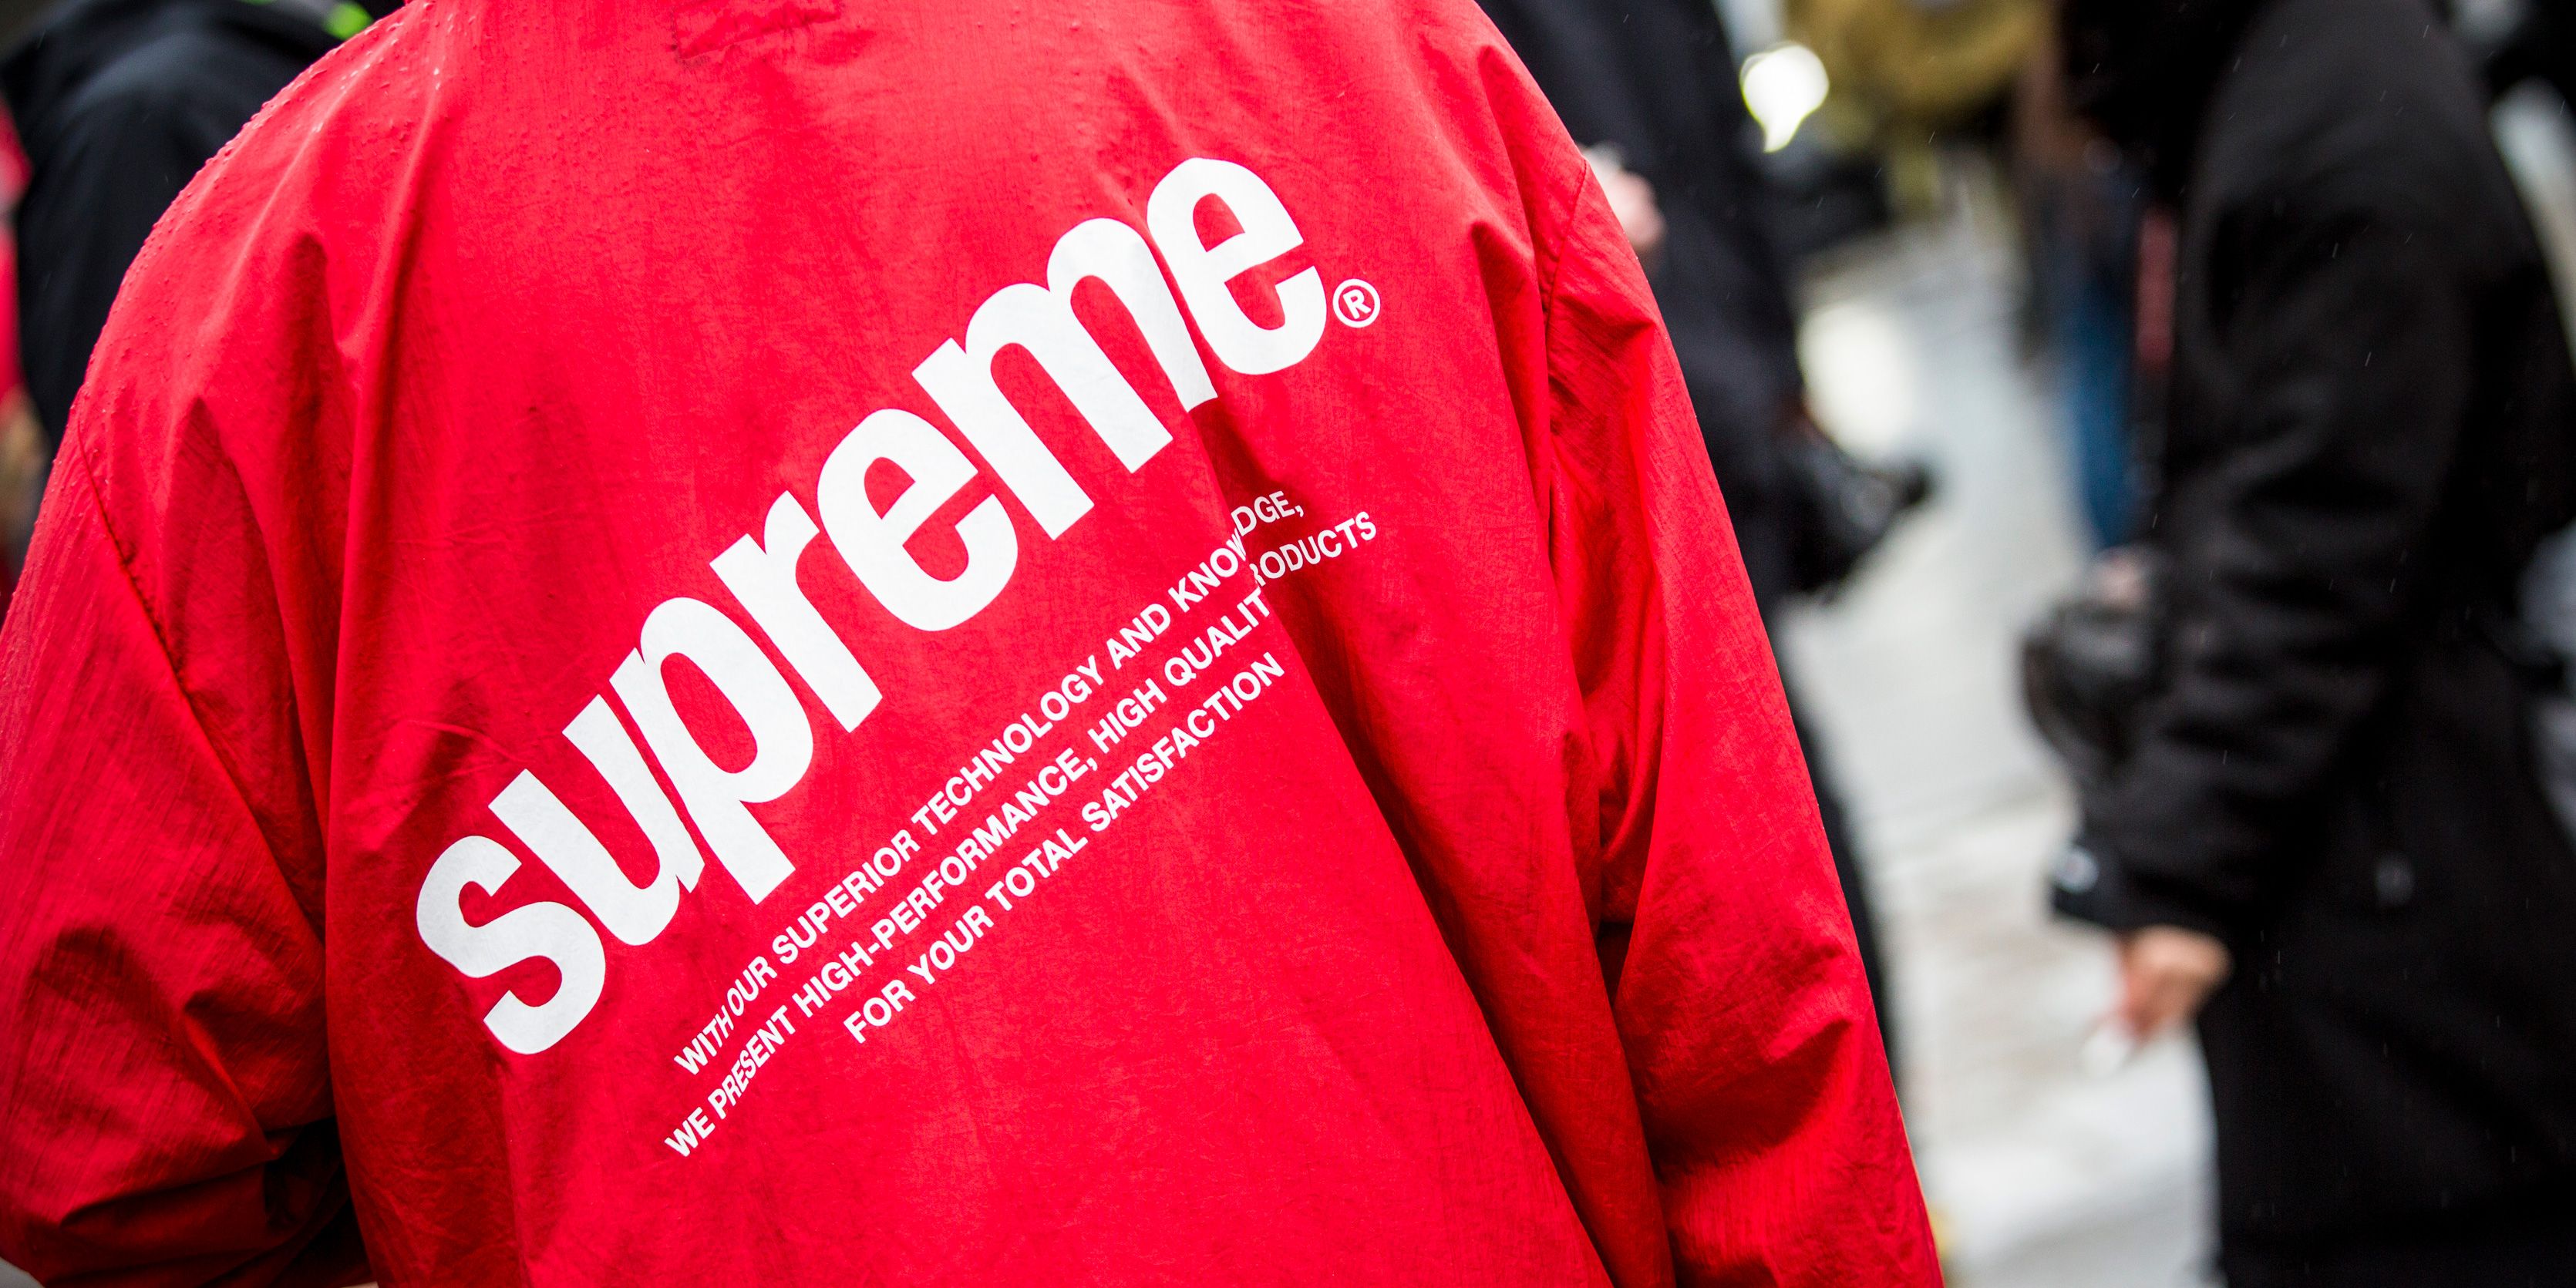 What's the Resale Value of a Stolen Supreme Store Banner?